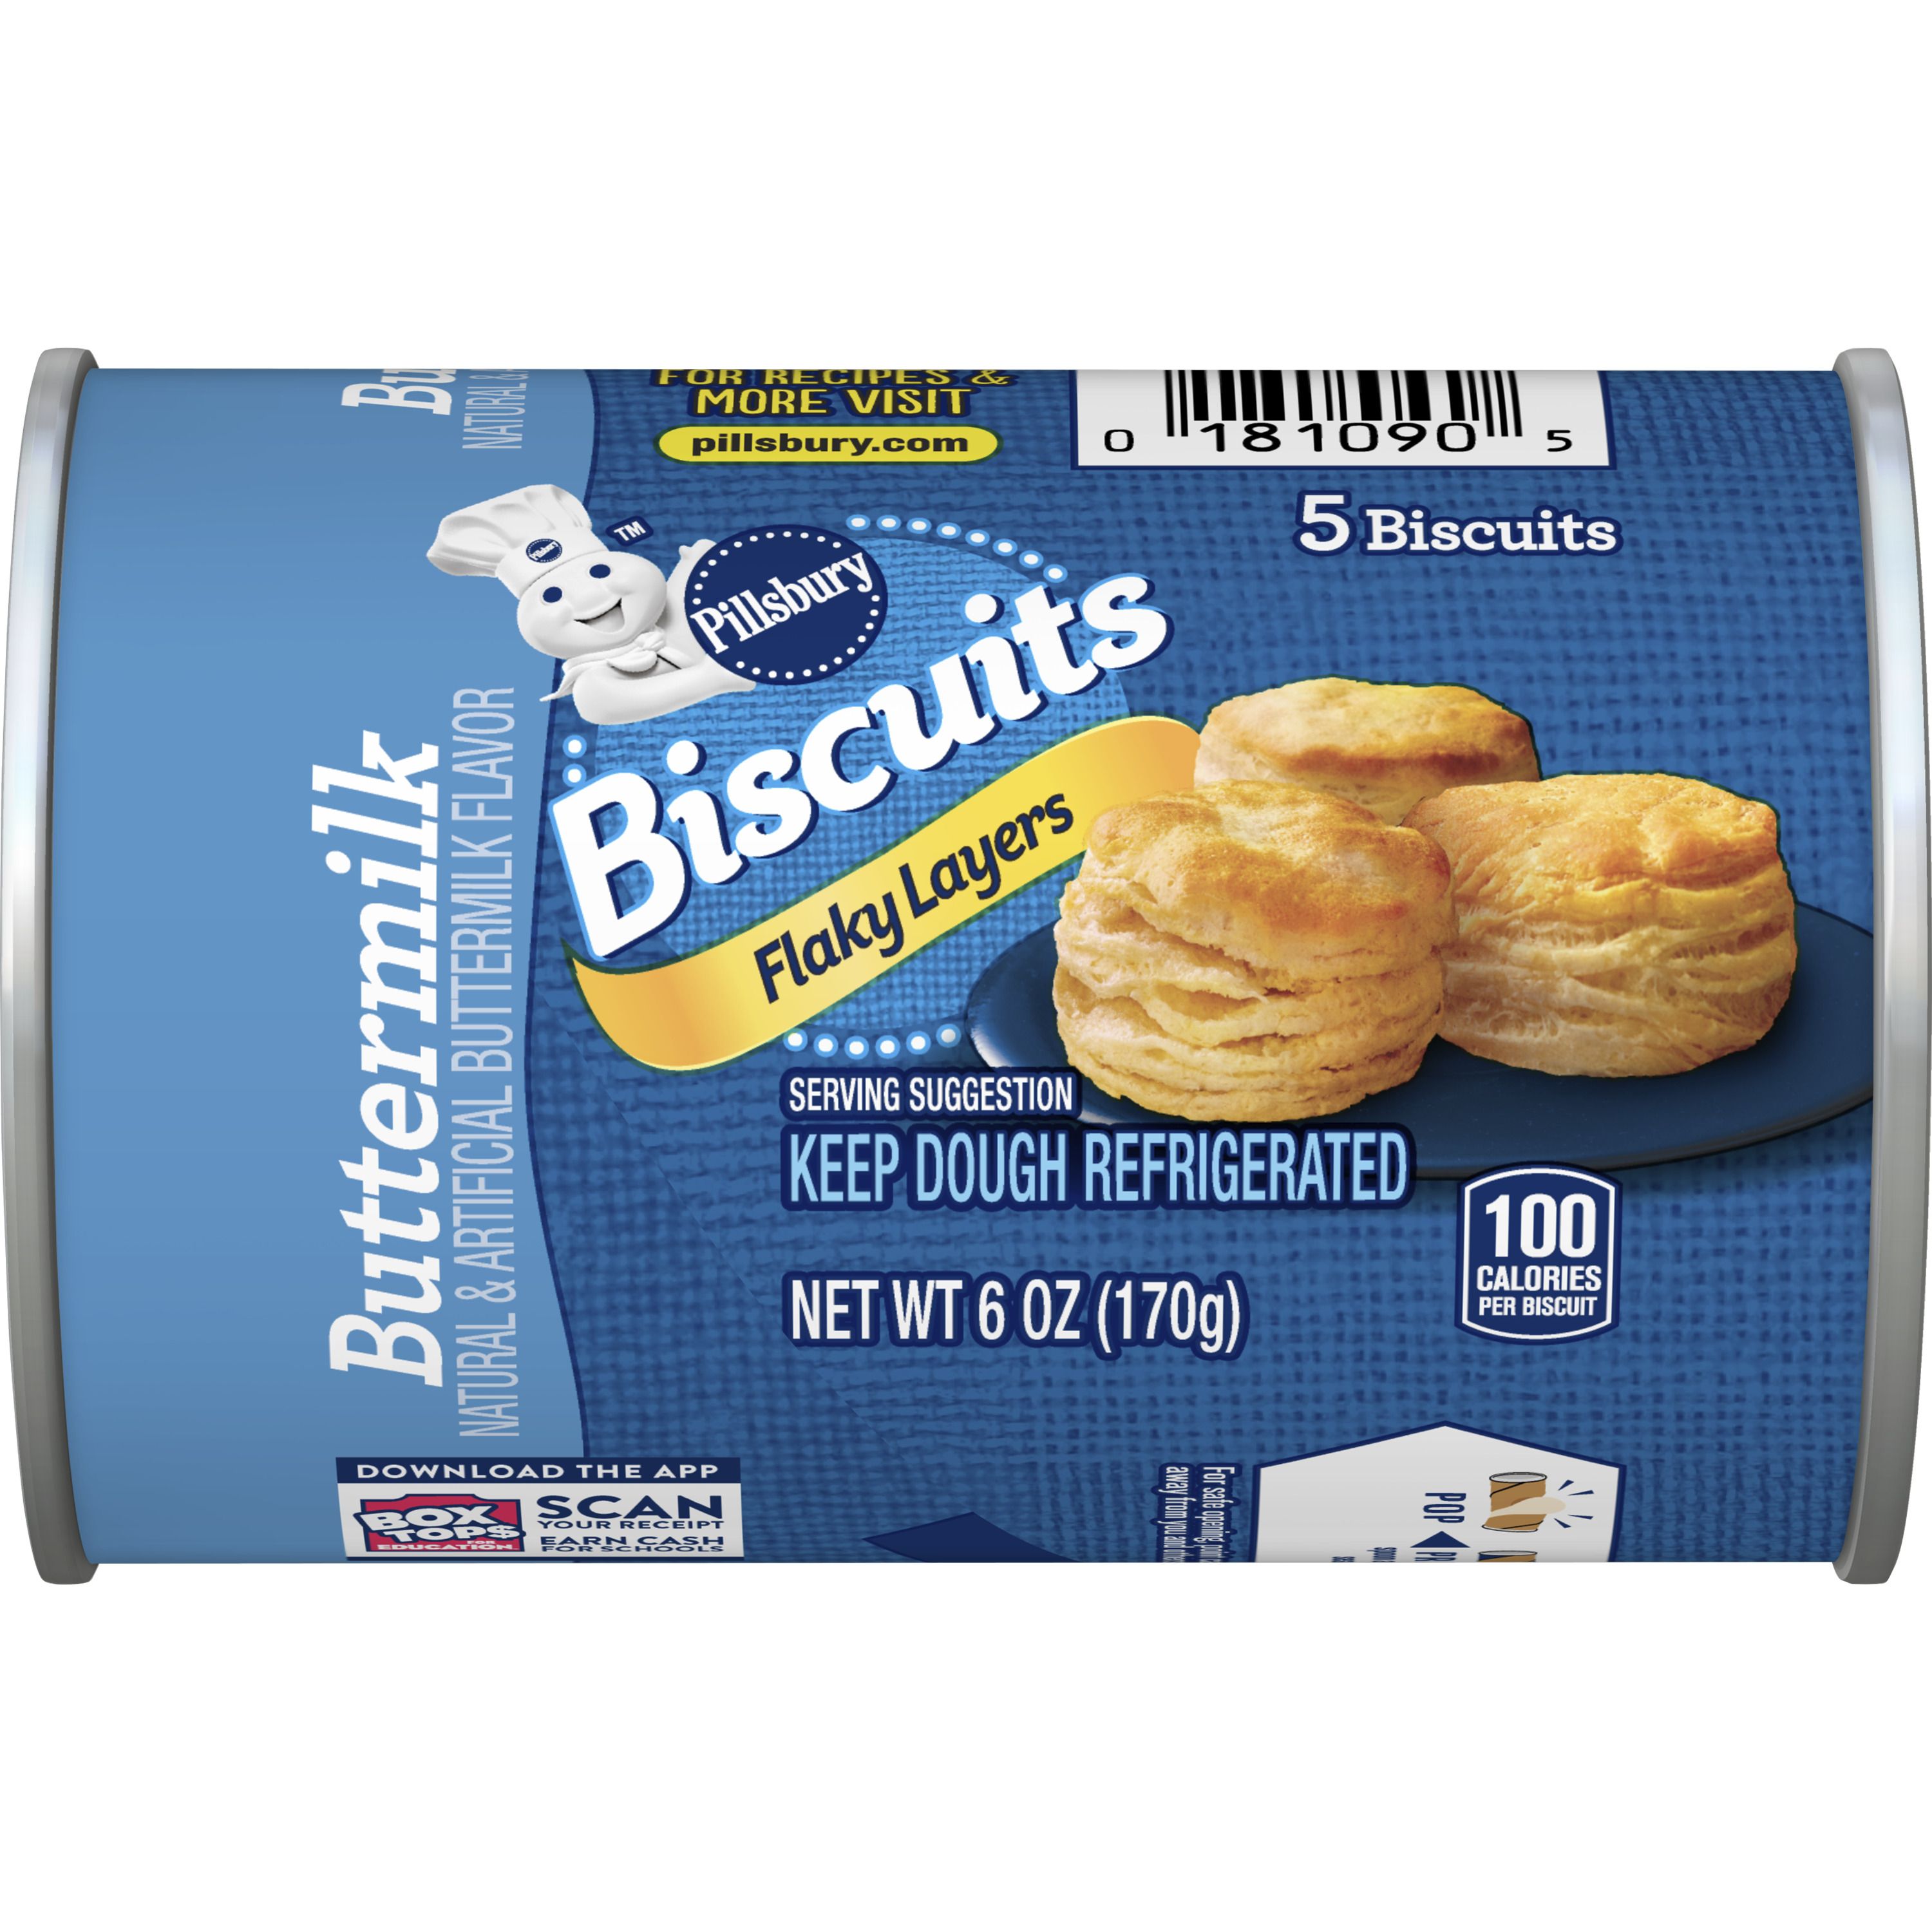 Pillsbury™ Flaky Layers Buttermilk Biscuits 5 ct - Front